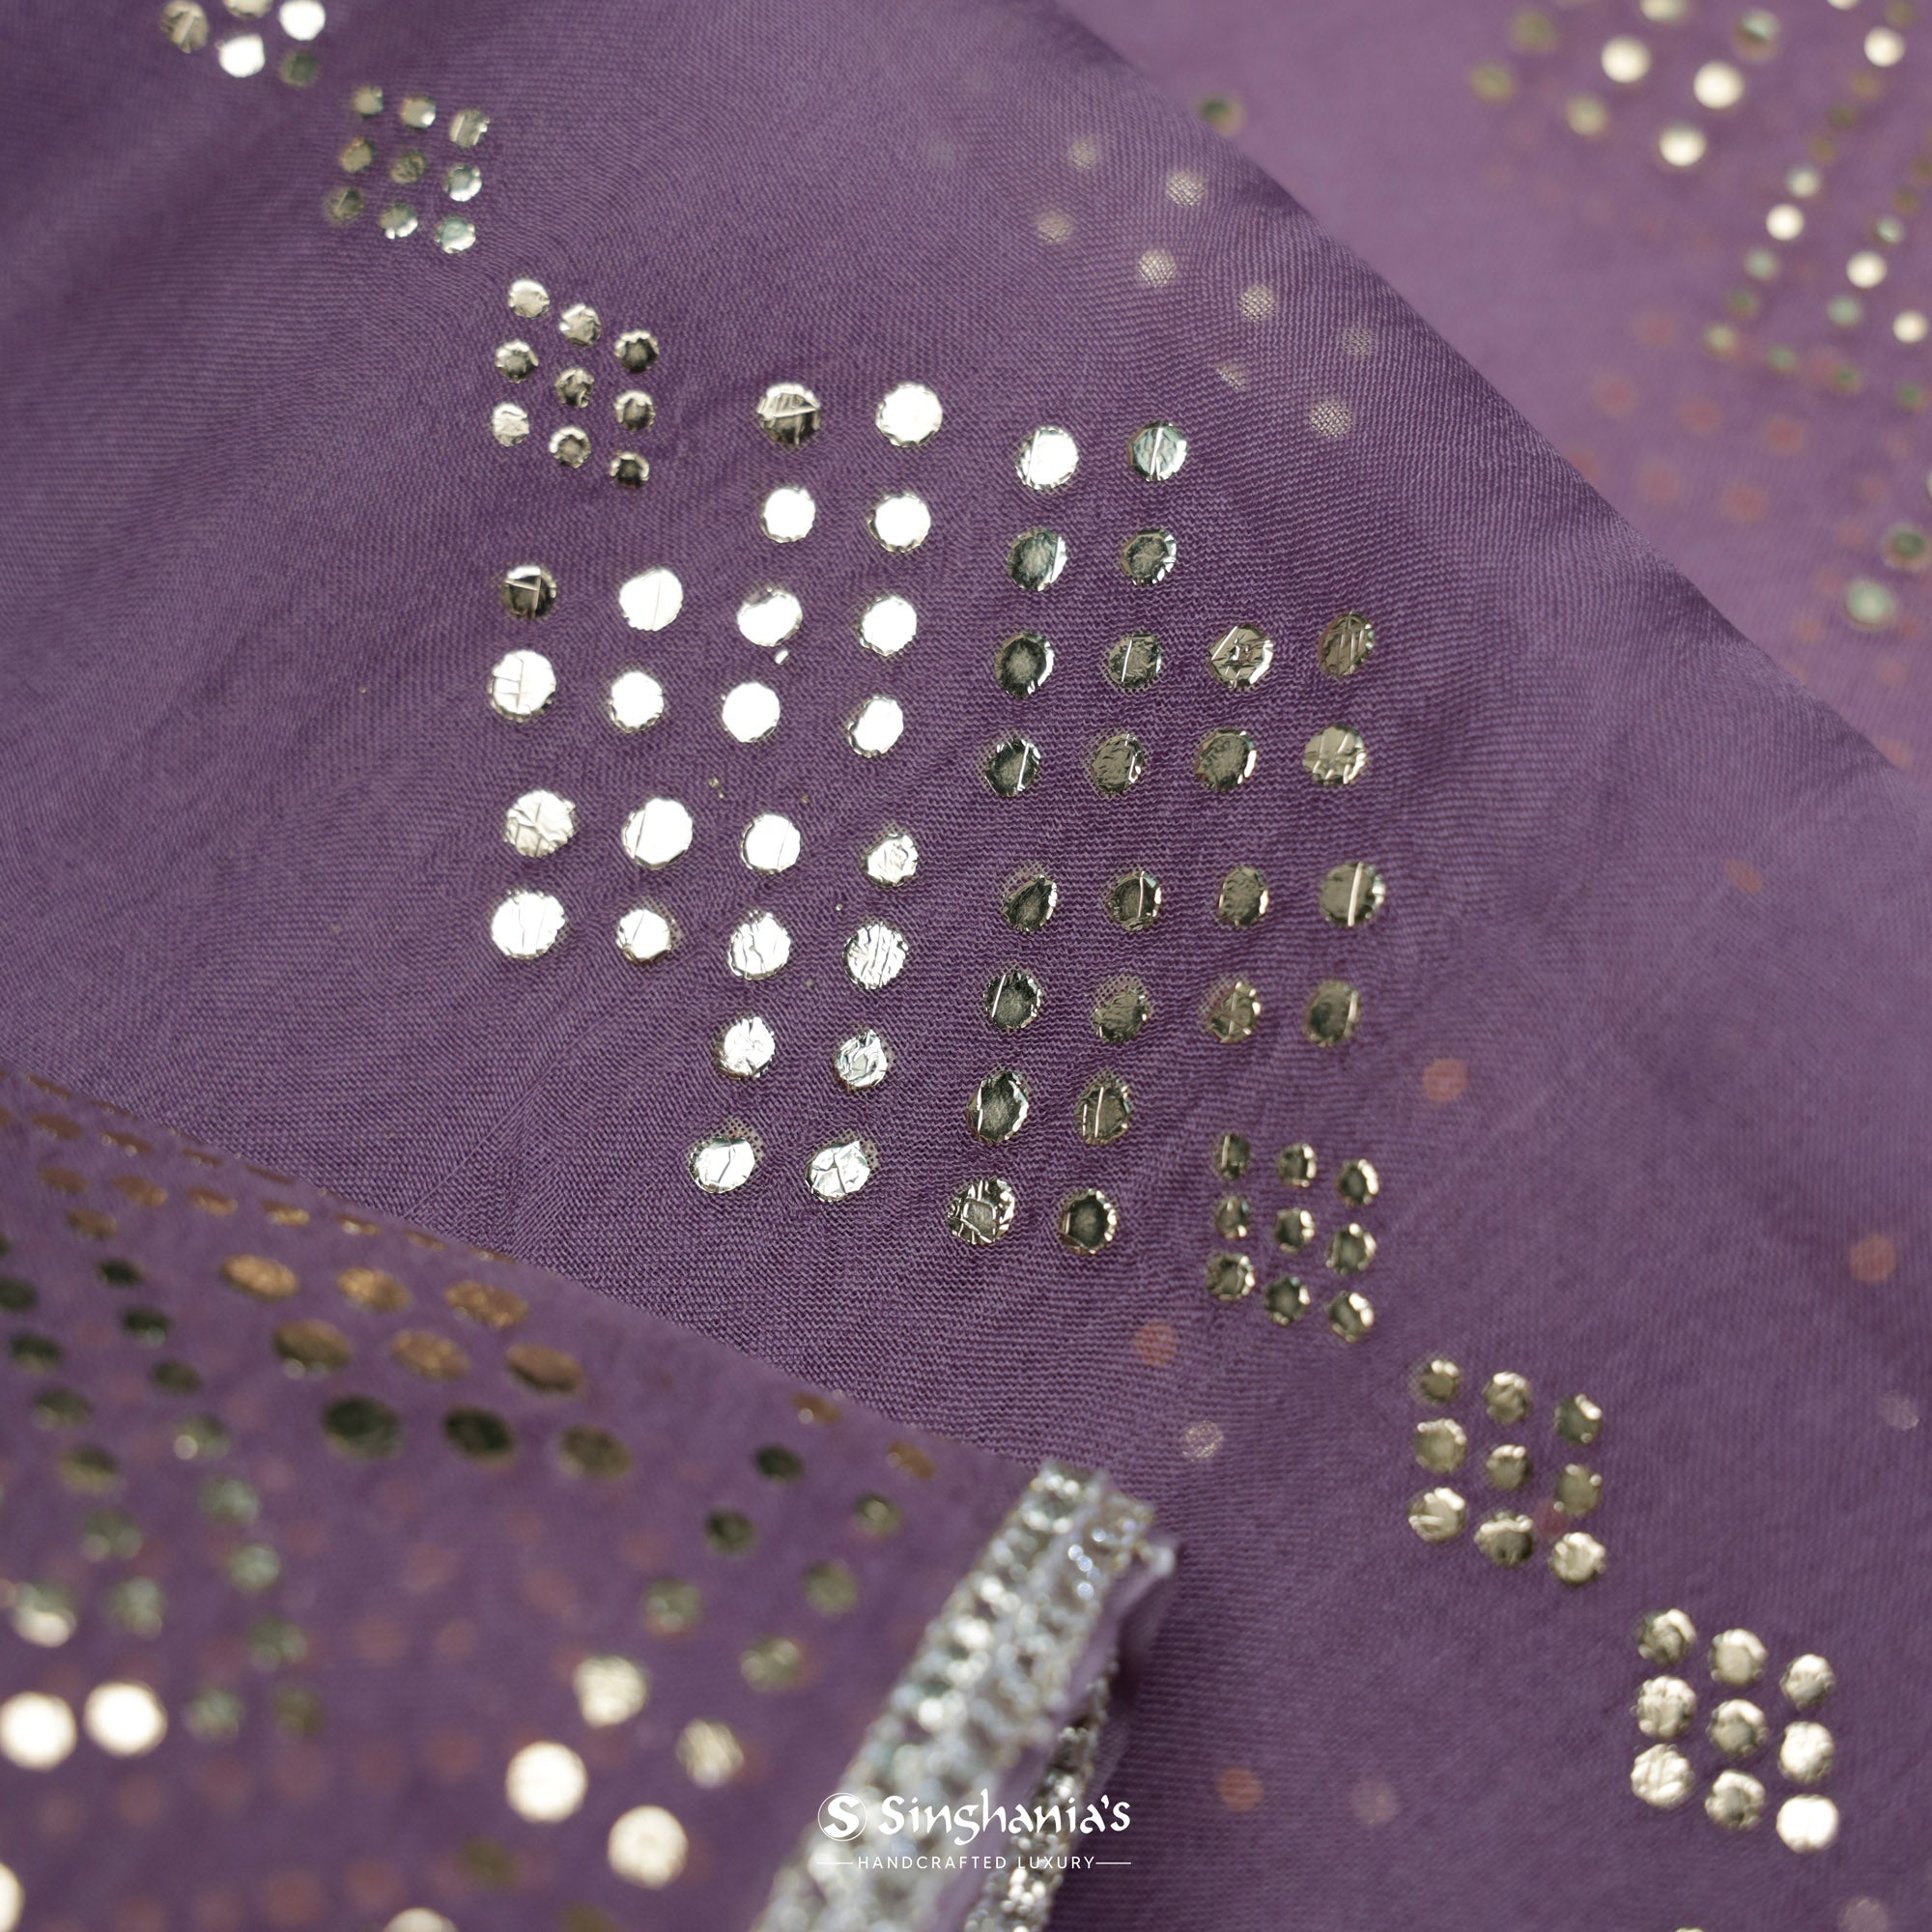 Faded Purple Organza Saree With Mukaish Embroidery